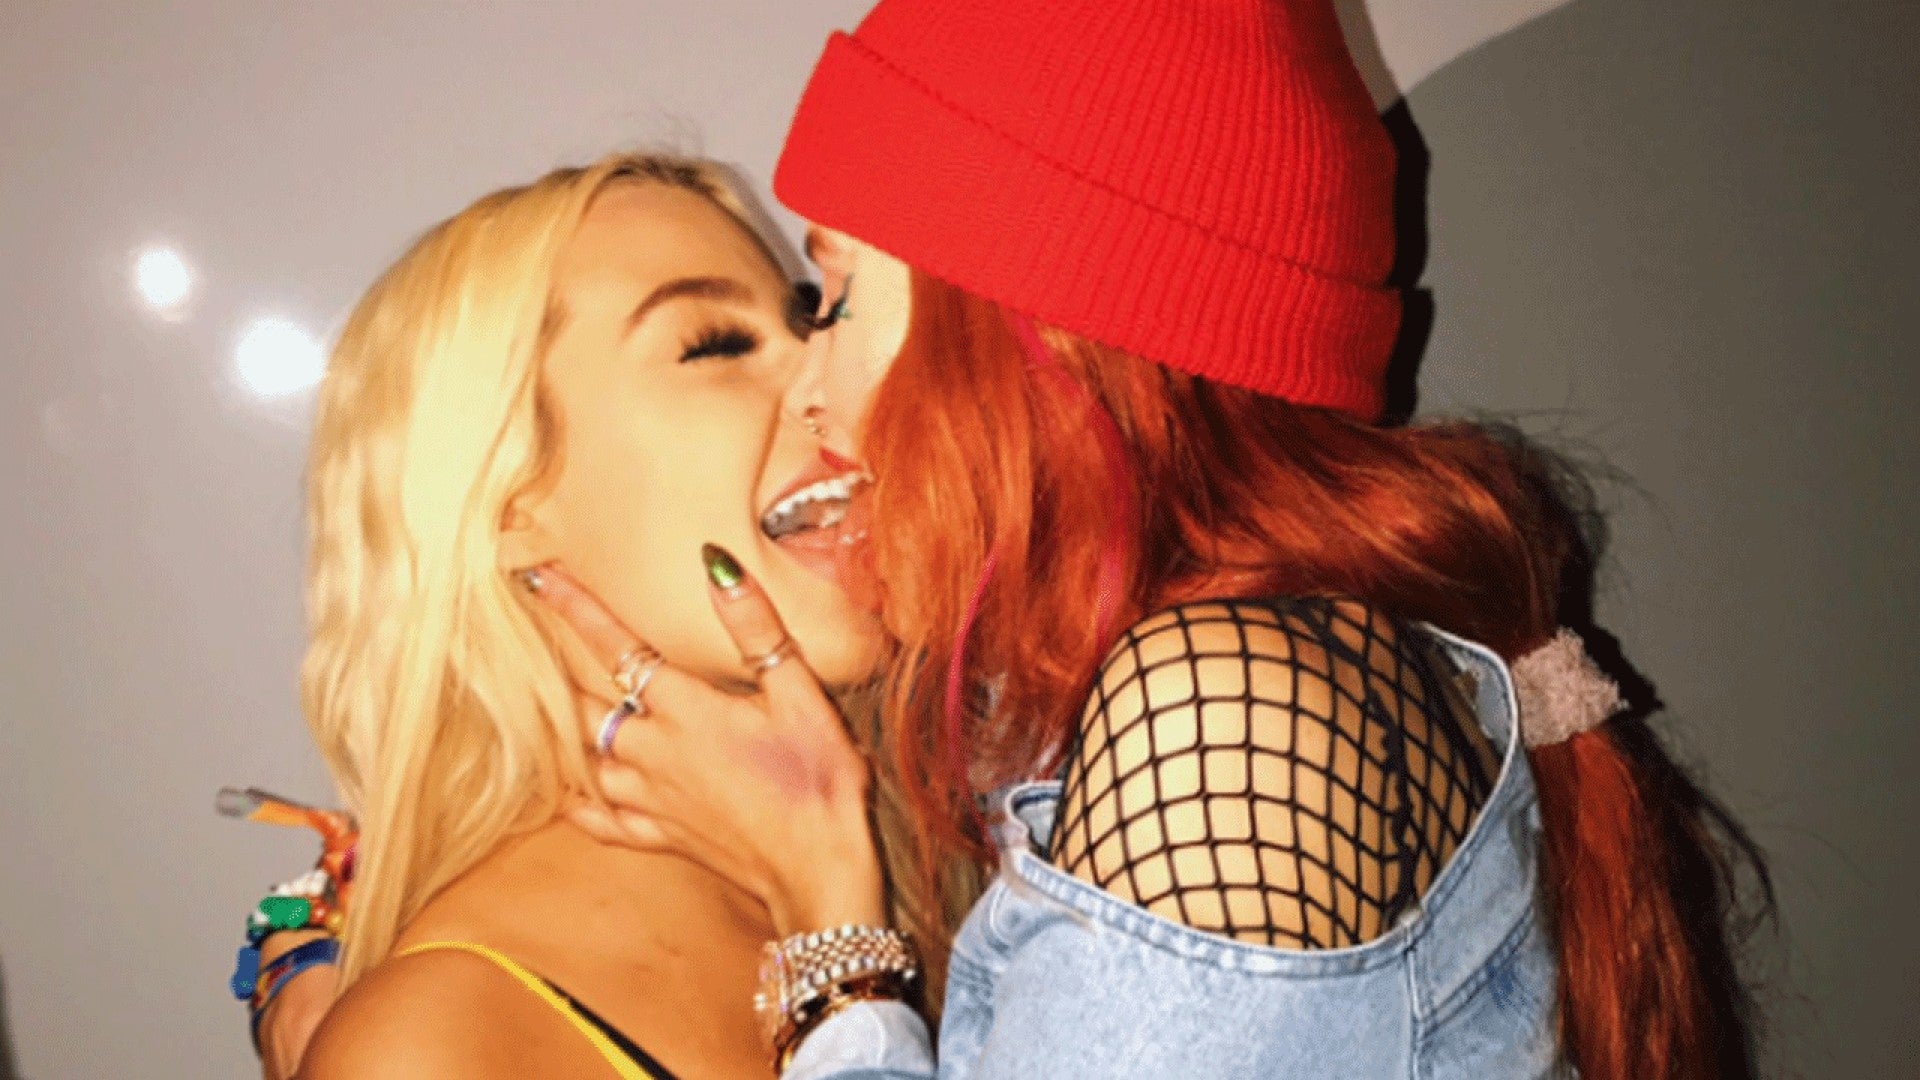 Bella Thorne Naked Lesbian - Bella Thorne and YouTube Star Tana Mongeau Make Out -- See the Pics!